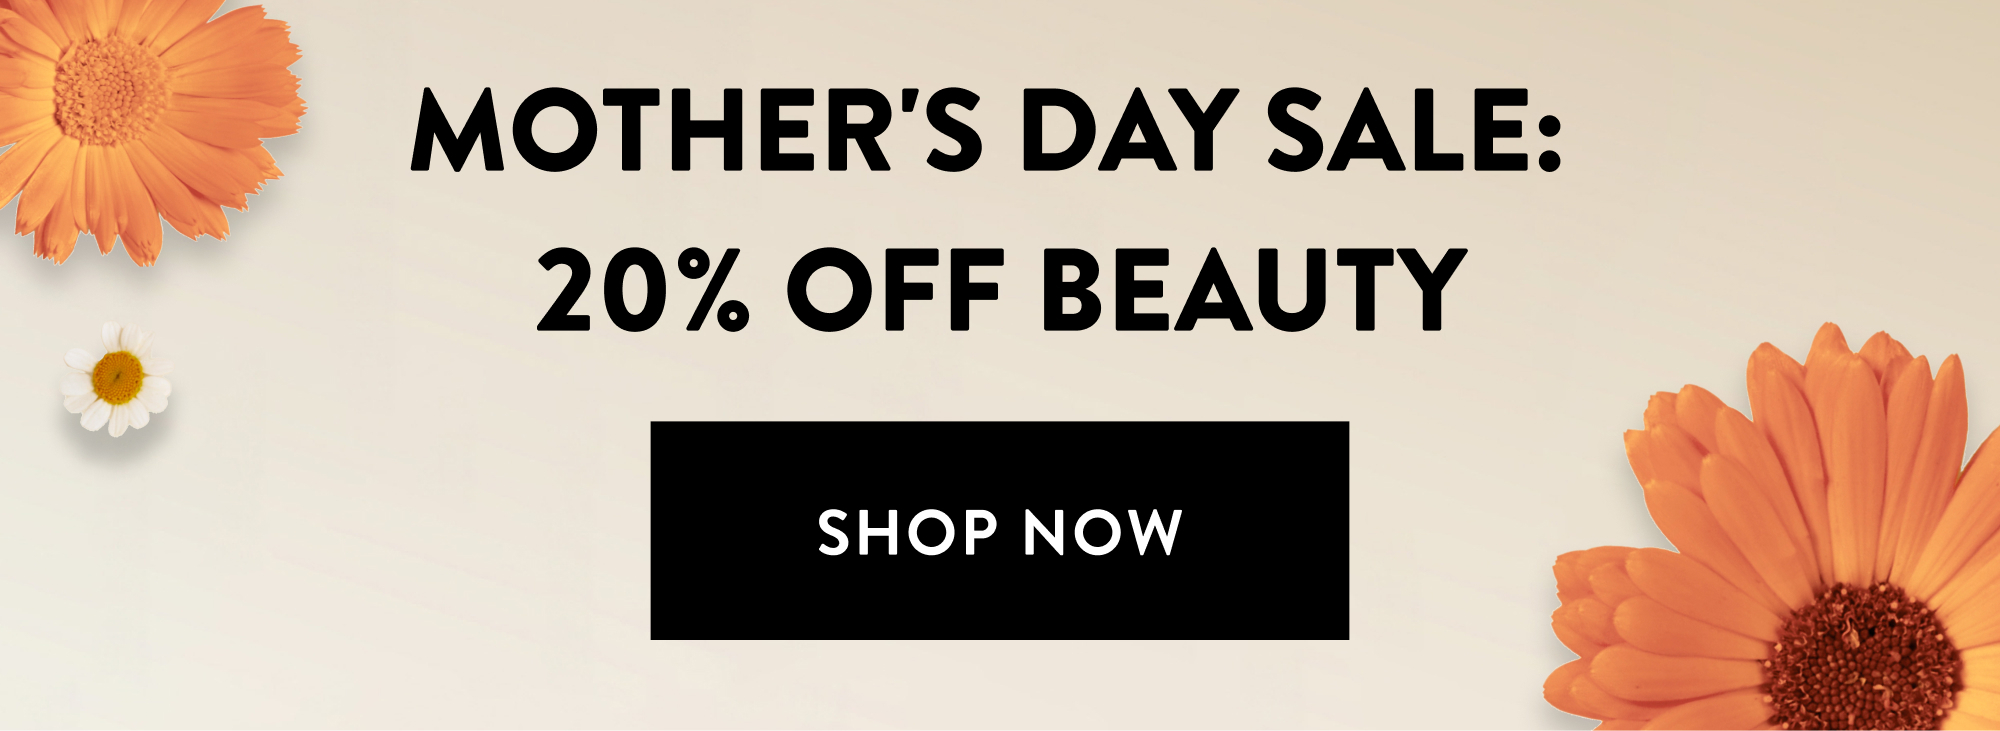 Mother's Day Sale: 20% off all Beauty. Explore clean beauty must-haves